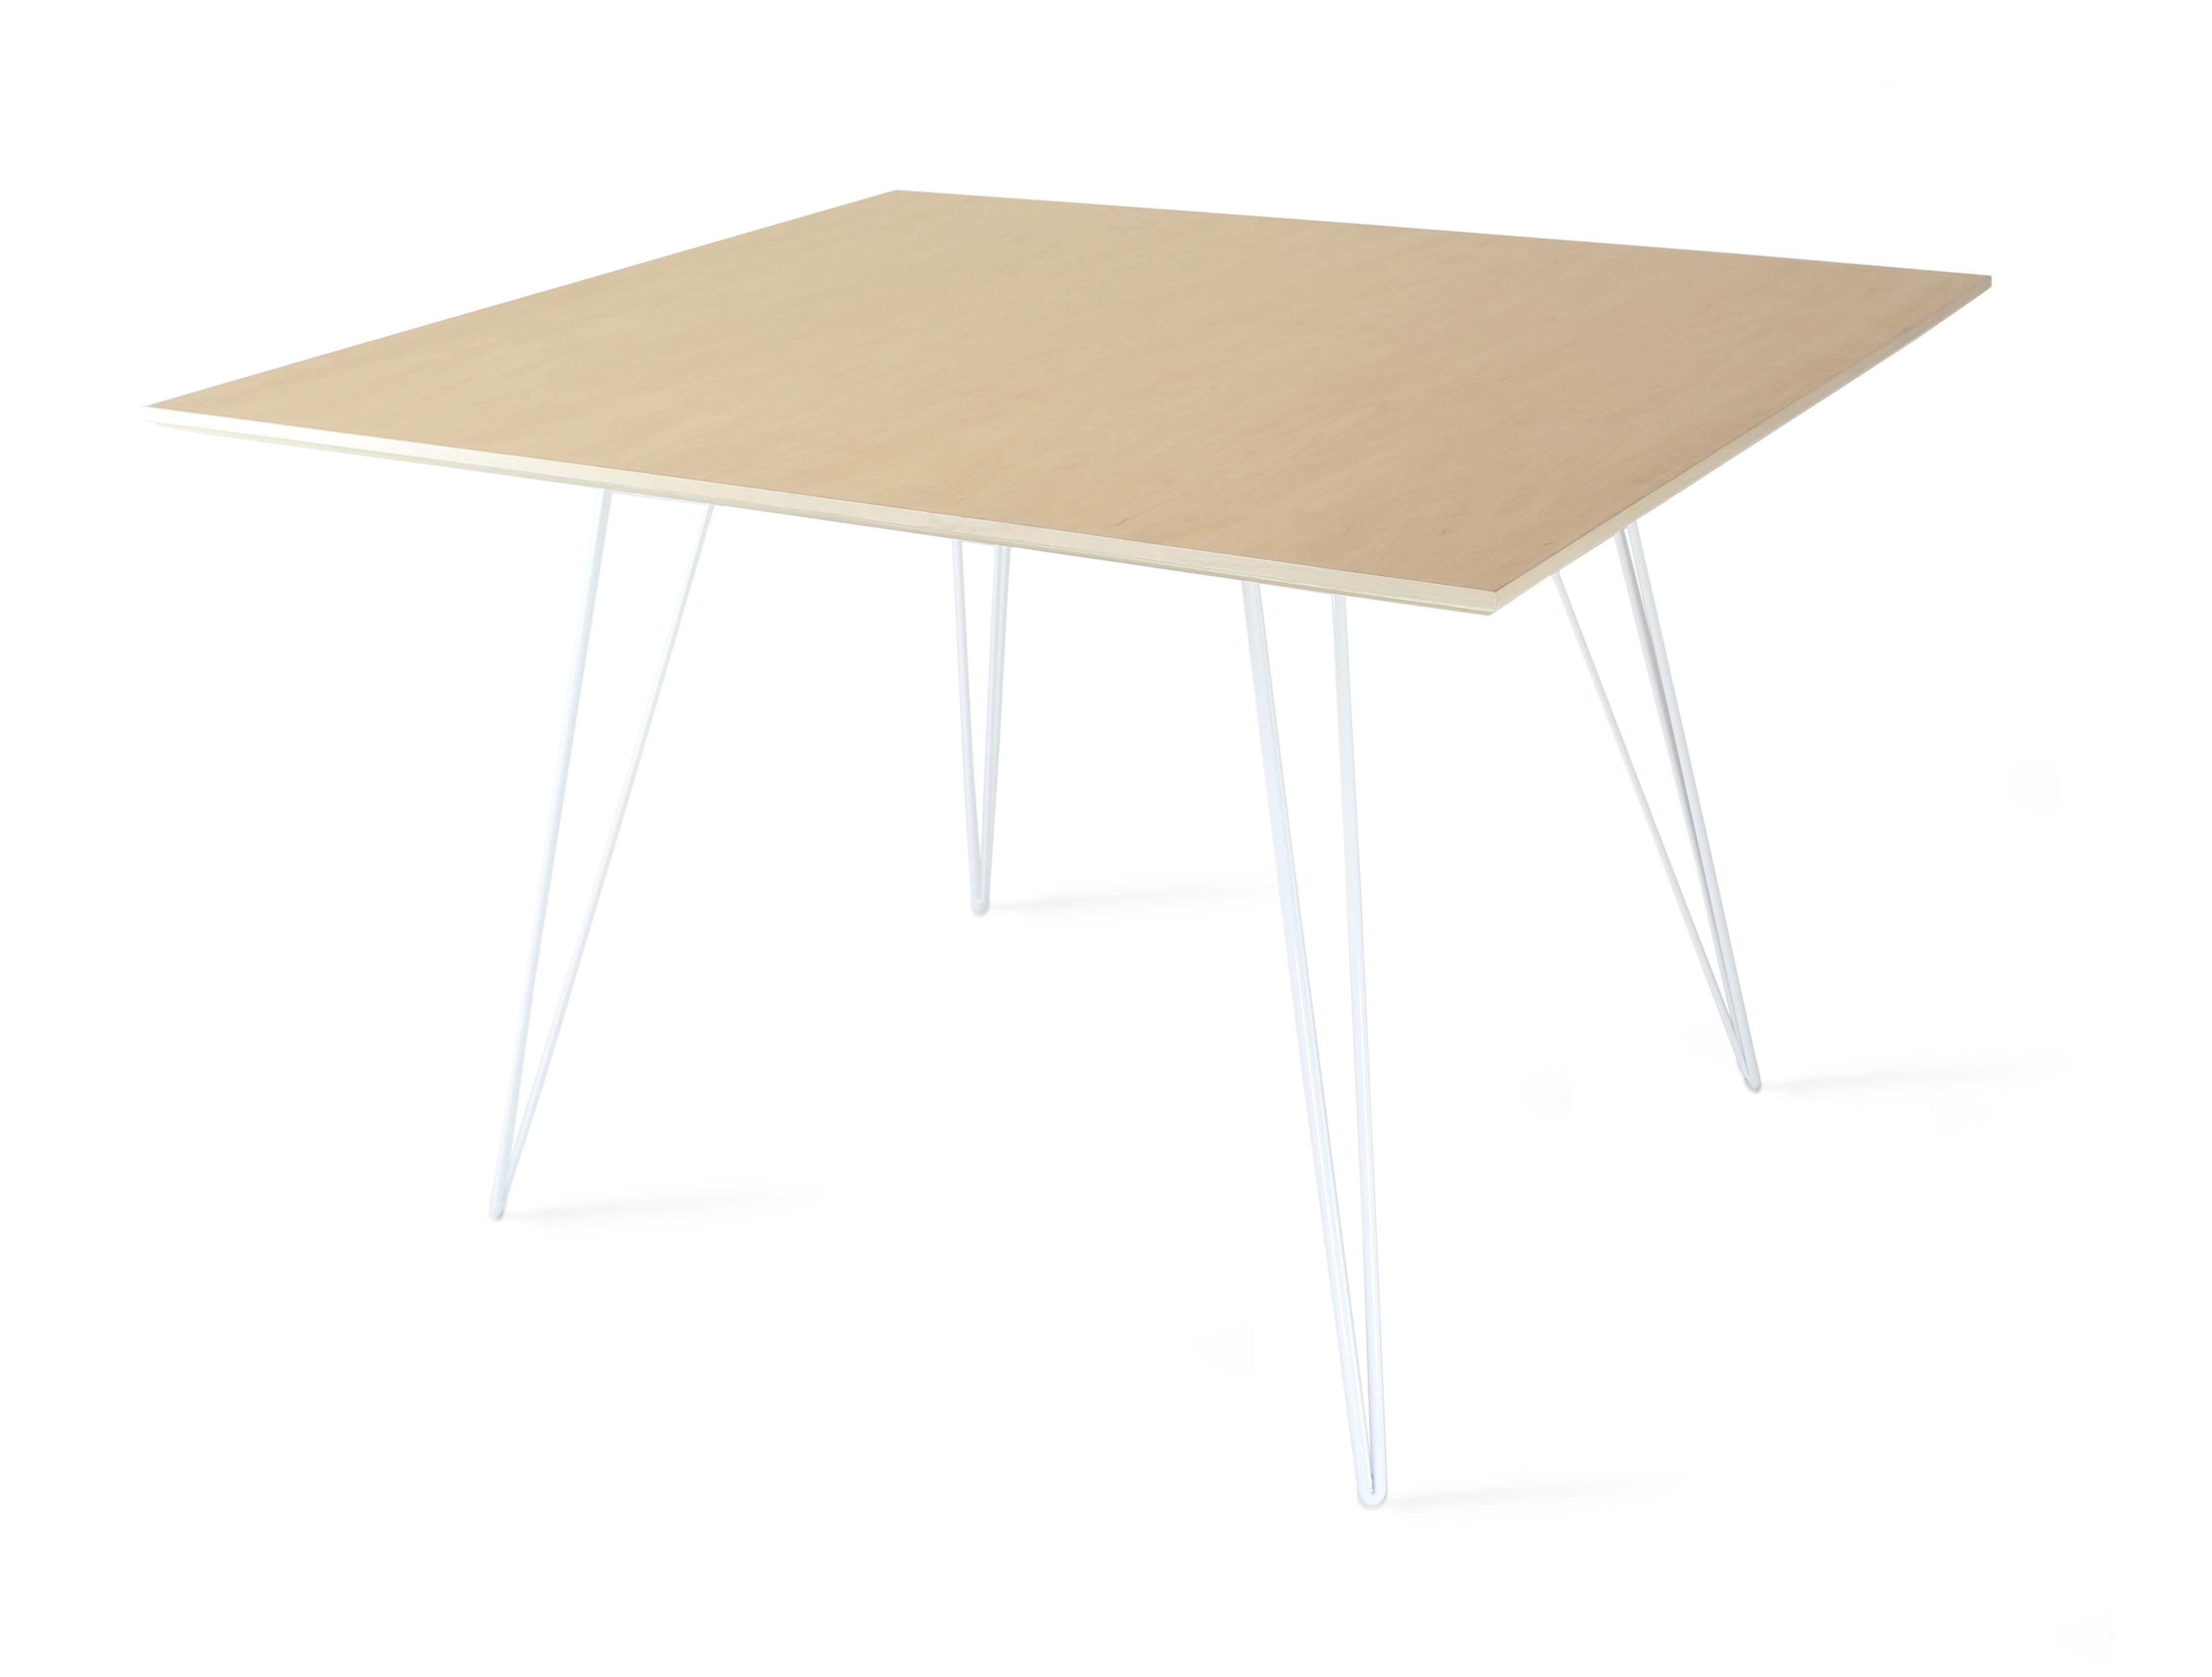 A thin, elegant and light Maple table that can be customized to any shape, size and color desired. This handcrafted item perfectly blends industrial white hairpin legs with a beveled wooden top. The irregular beauty of its natural wood combined with